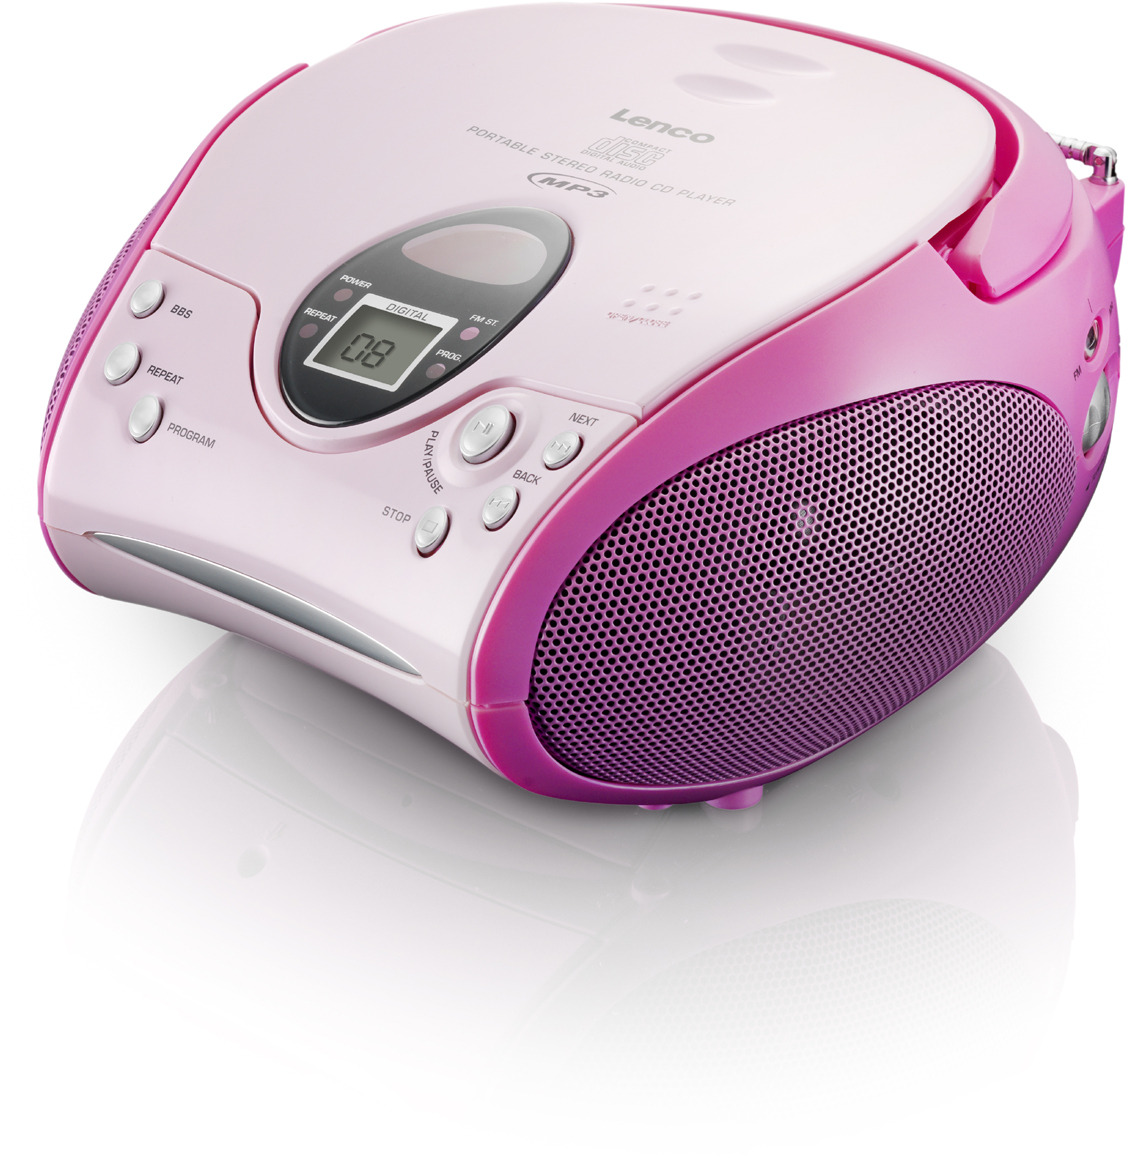 Lenco SCD-24 Stereo UKW-Radio mit CD-Player (Rosa/Pink) - best4you | Küchenradios